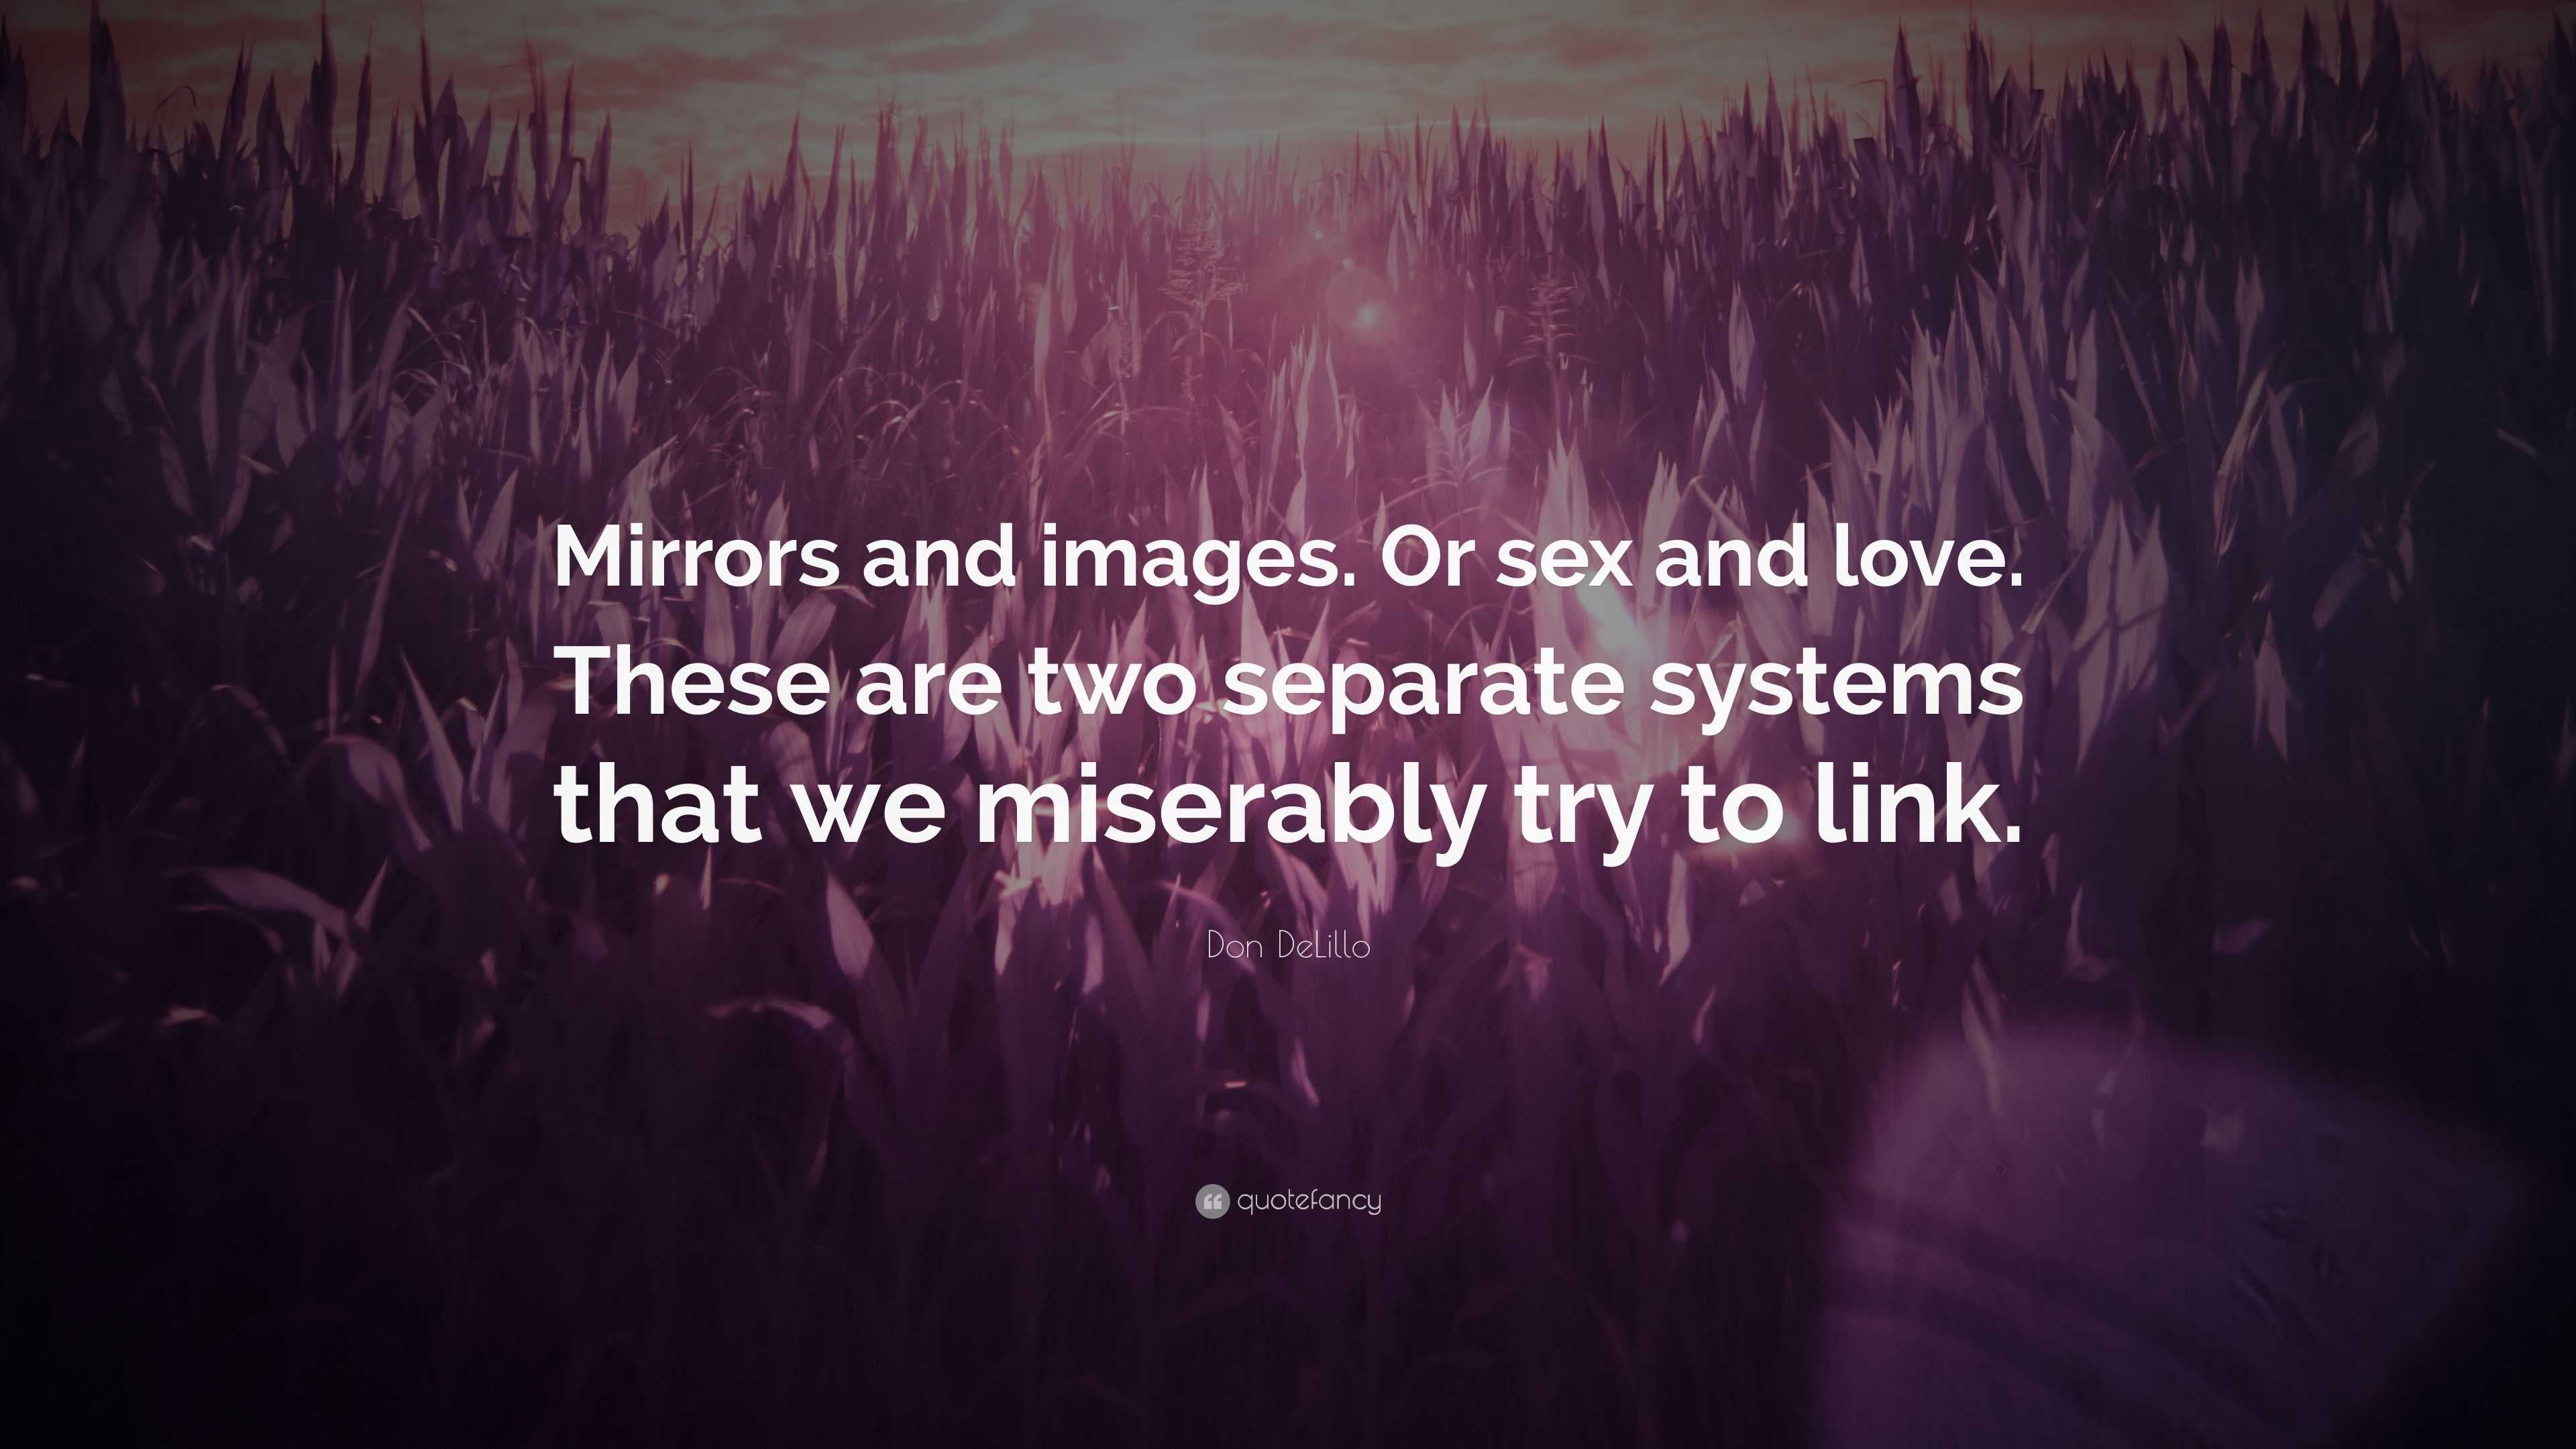 Don Delillo Quote “mirrors And Images Or Sex And Love These Are Two Separate Systems That We 3800